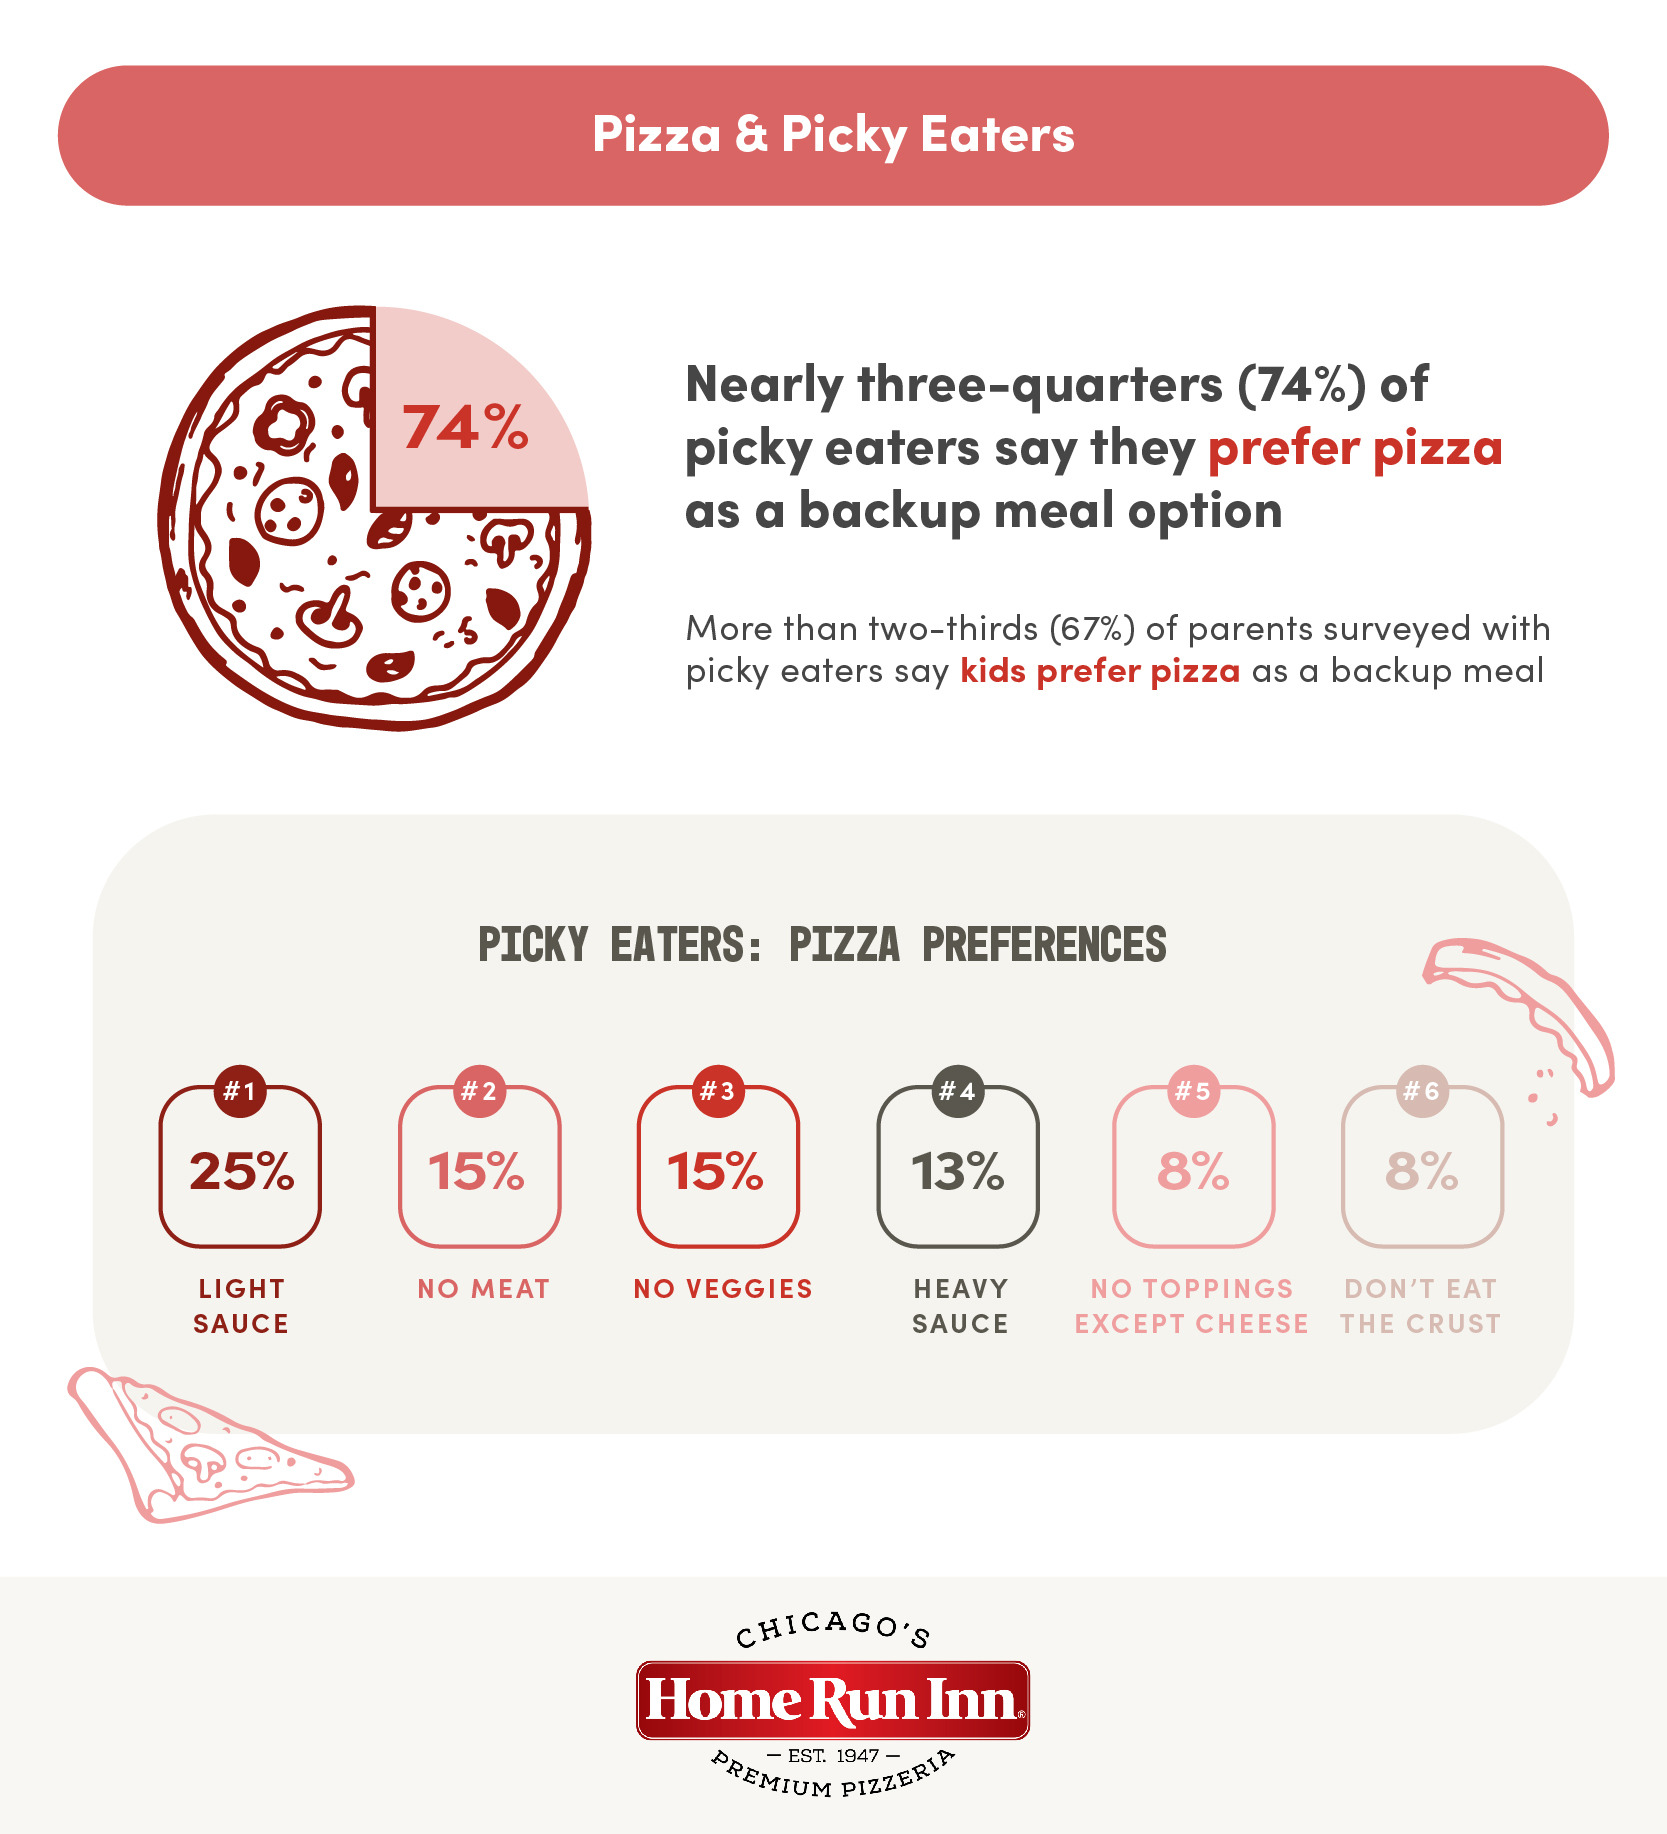 74% of picky eaters will eat pizza as a backup meal option